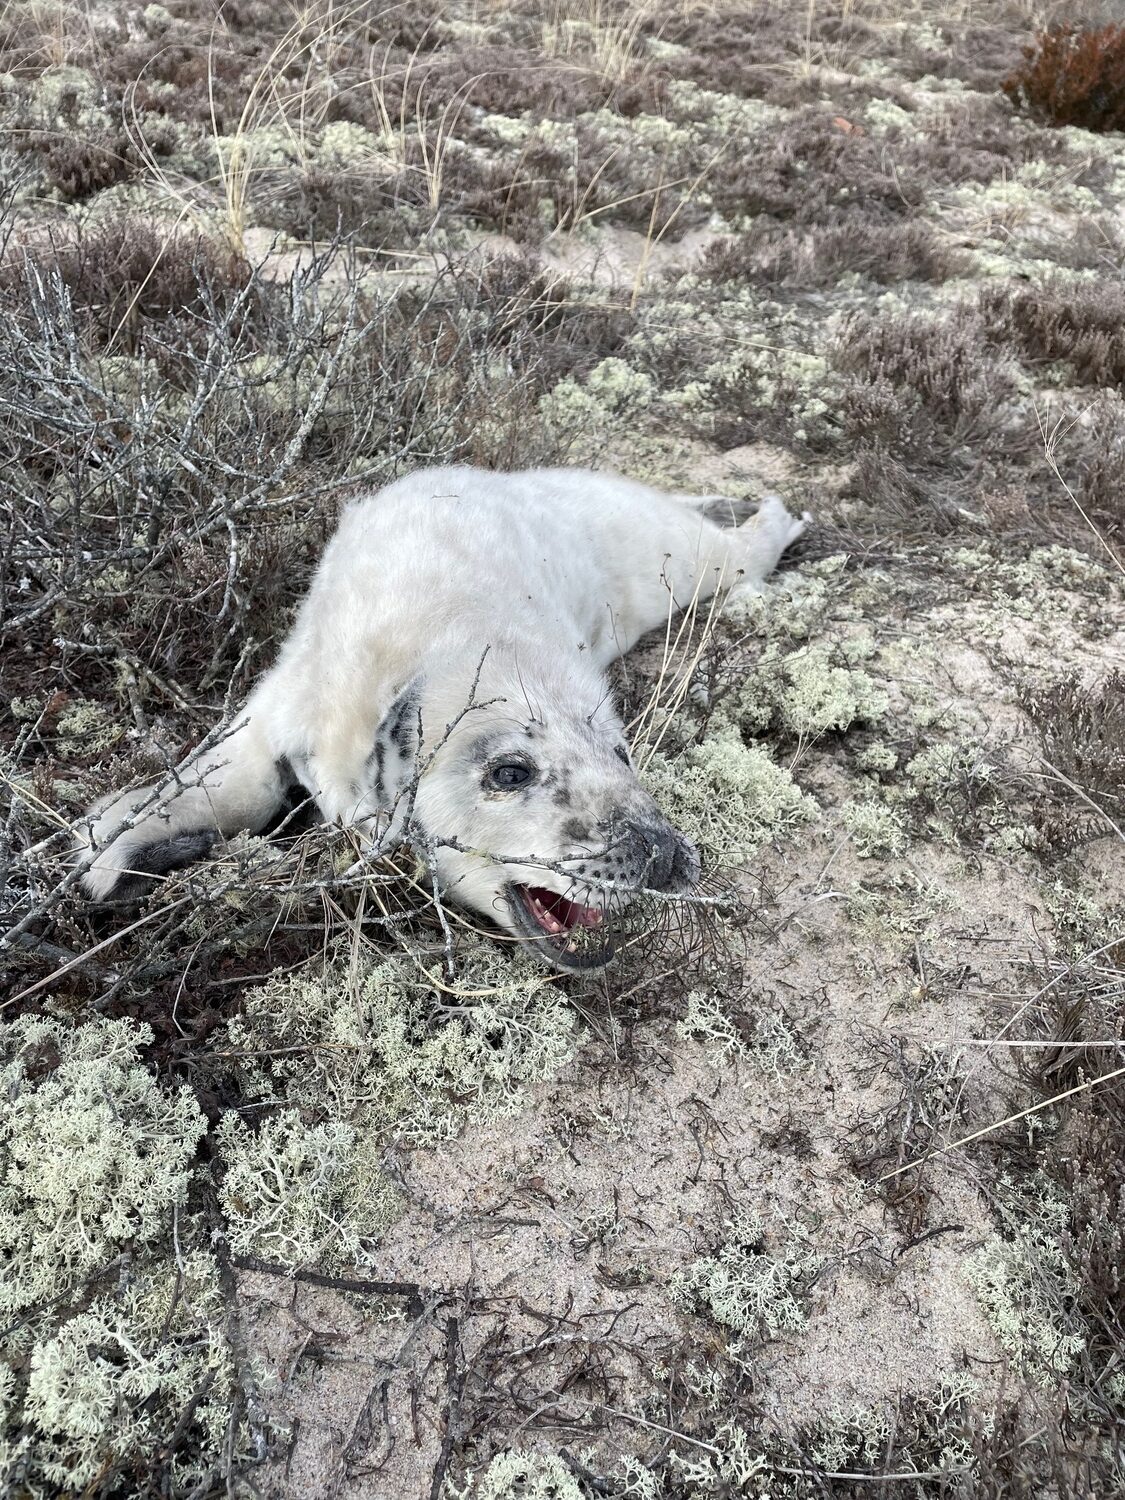 A baby gray seal, just 5 weeks old, found itself stuck in the dunelands of Montauk, where it was found by a father and daughter and rescued by marine wildlife biologists. DAVE WHITE